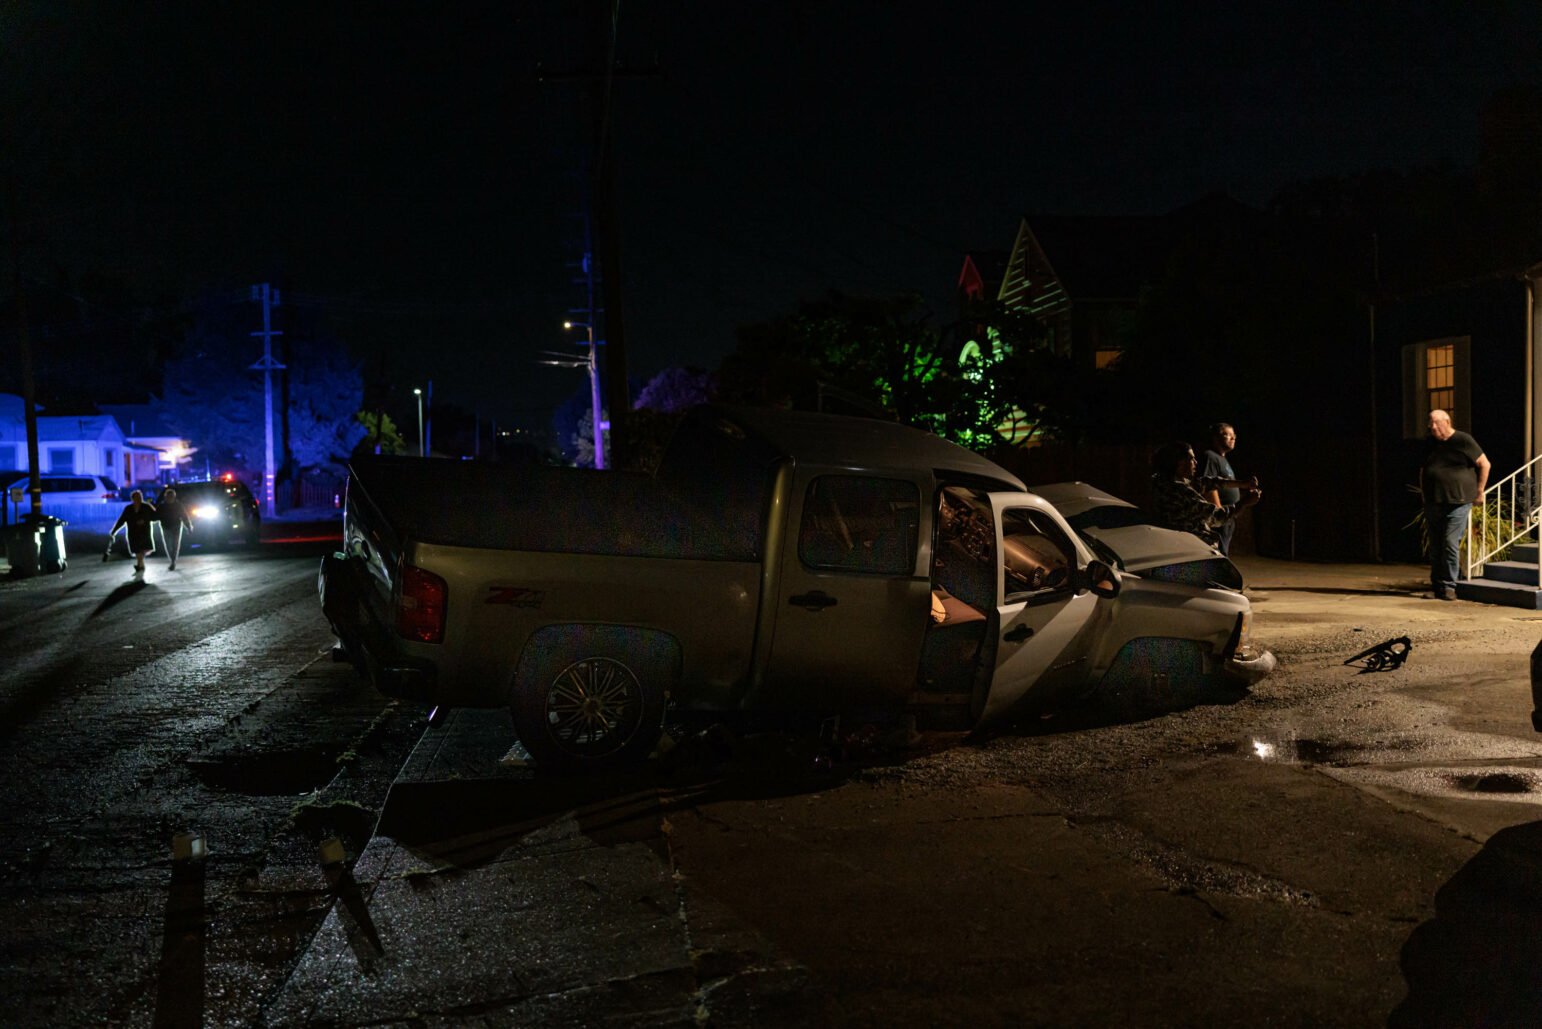 Nighttime view of a silver pickup truck that has crashed into a white picket fence in front of a dark blue house. A police officer is inspecting the truck, and another person is sitting inside the vehicle. The house is partially illuminated by its porch light and nearby police car lights.